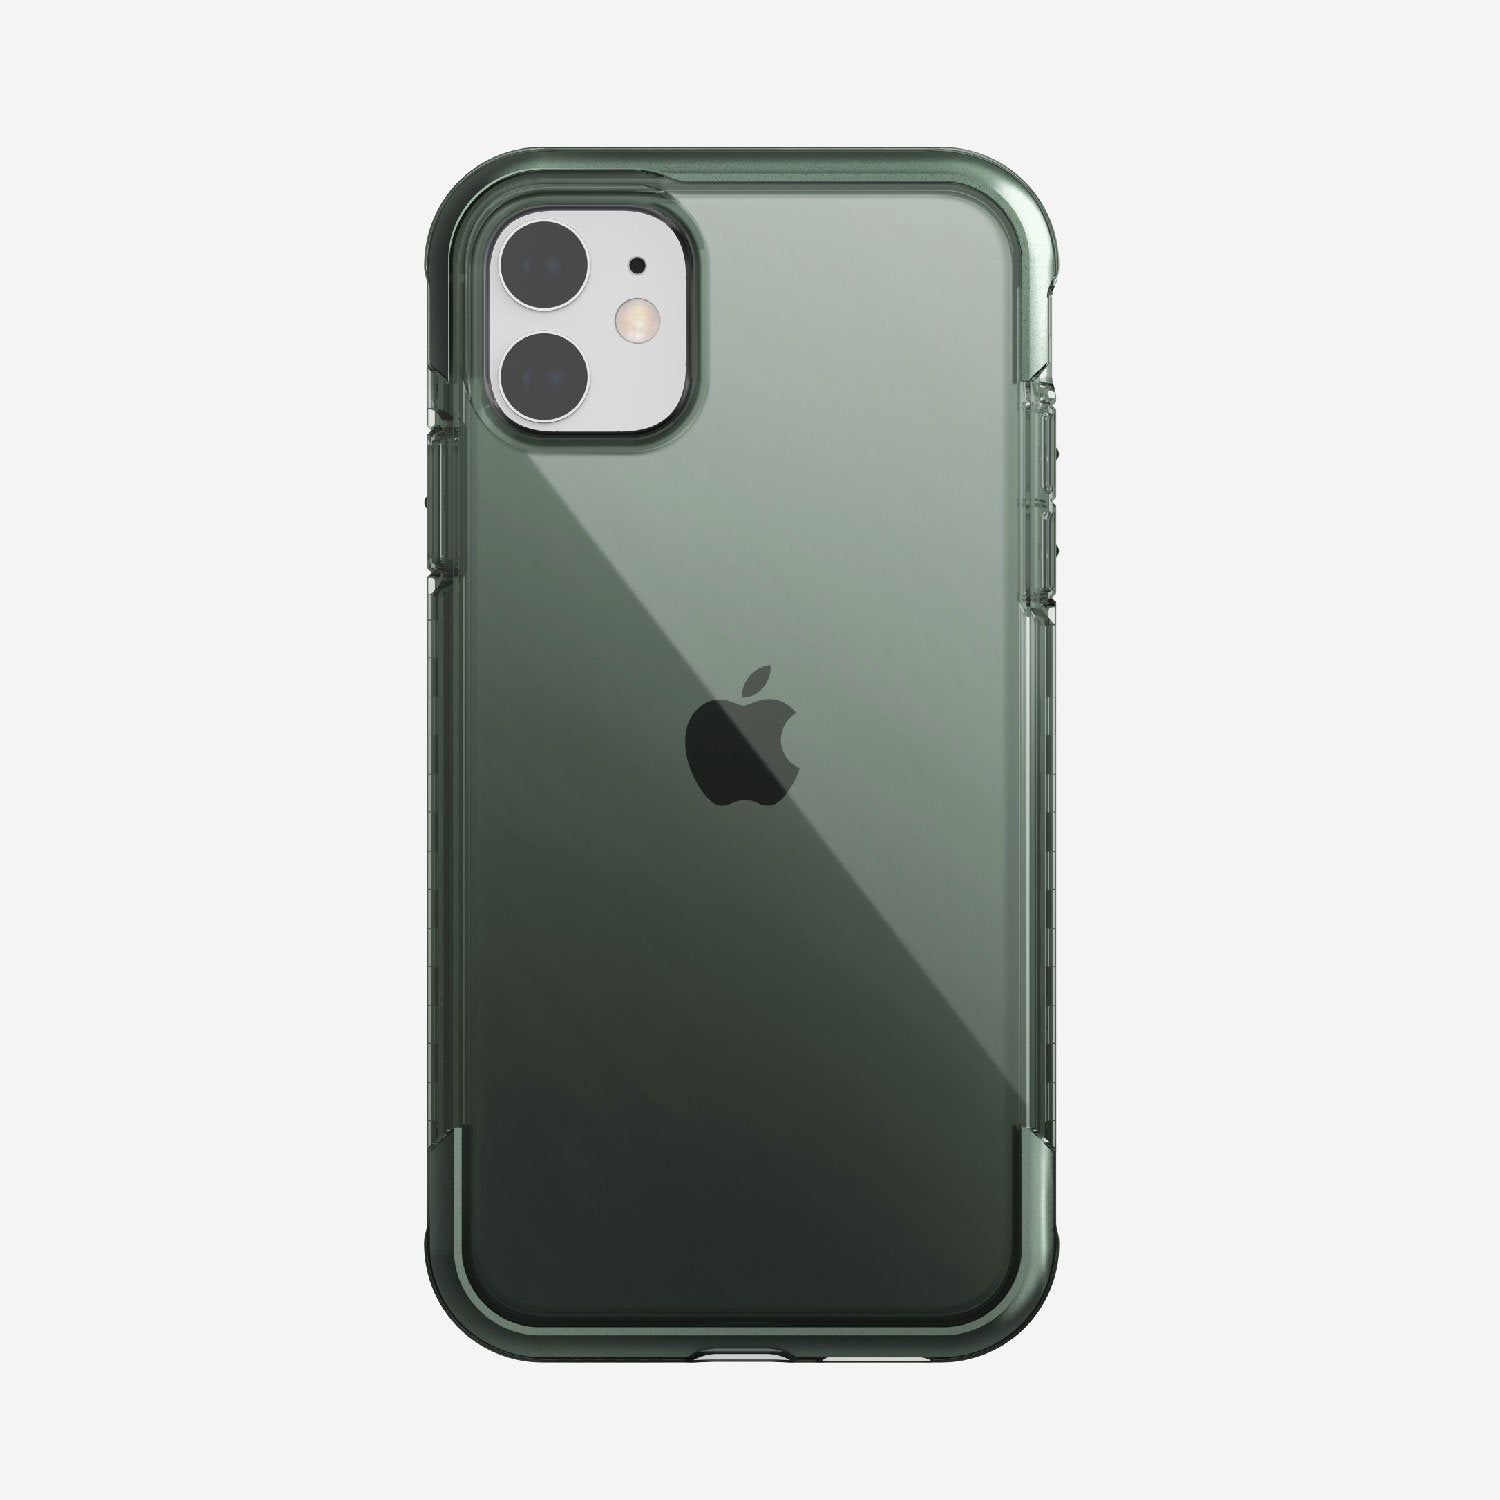 Raptic AIR iPhone 11 Pro Case in green providing drop protection.